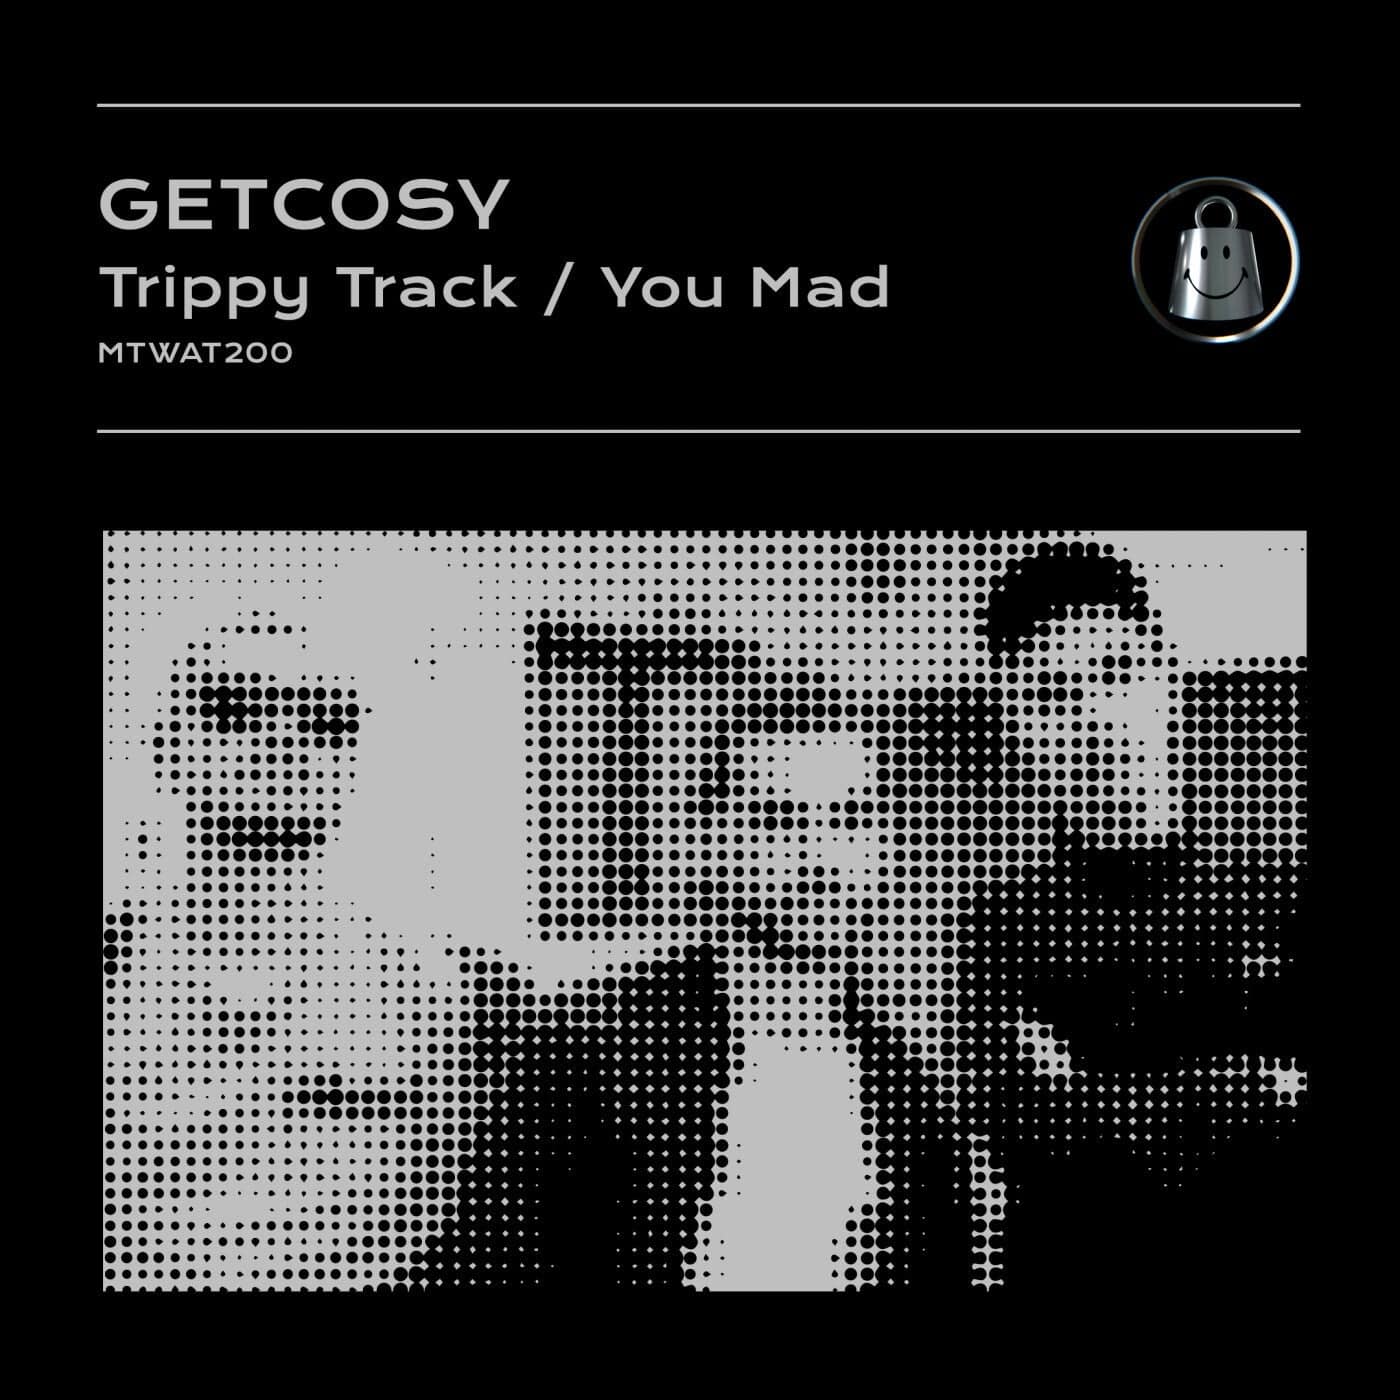 Download Trippy Track / You Mad on Electrobuzz